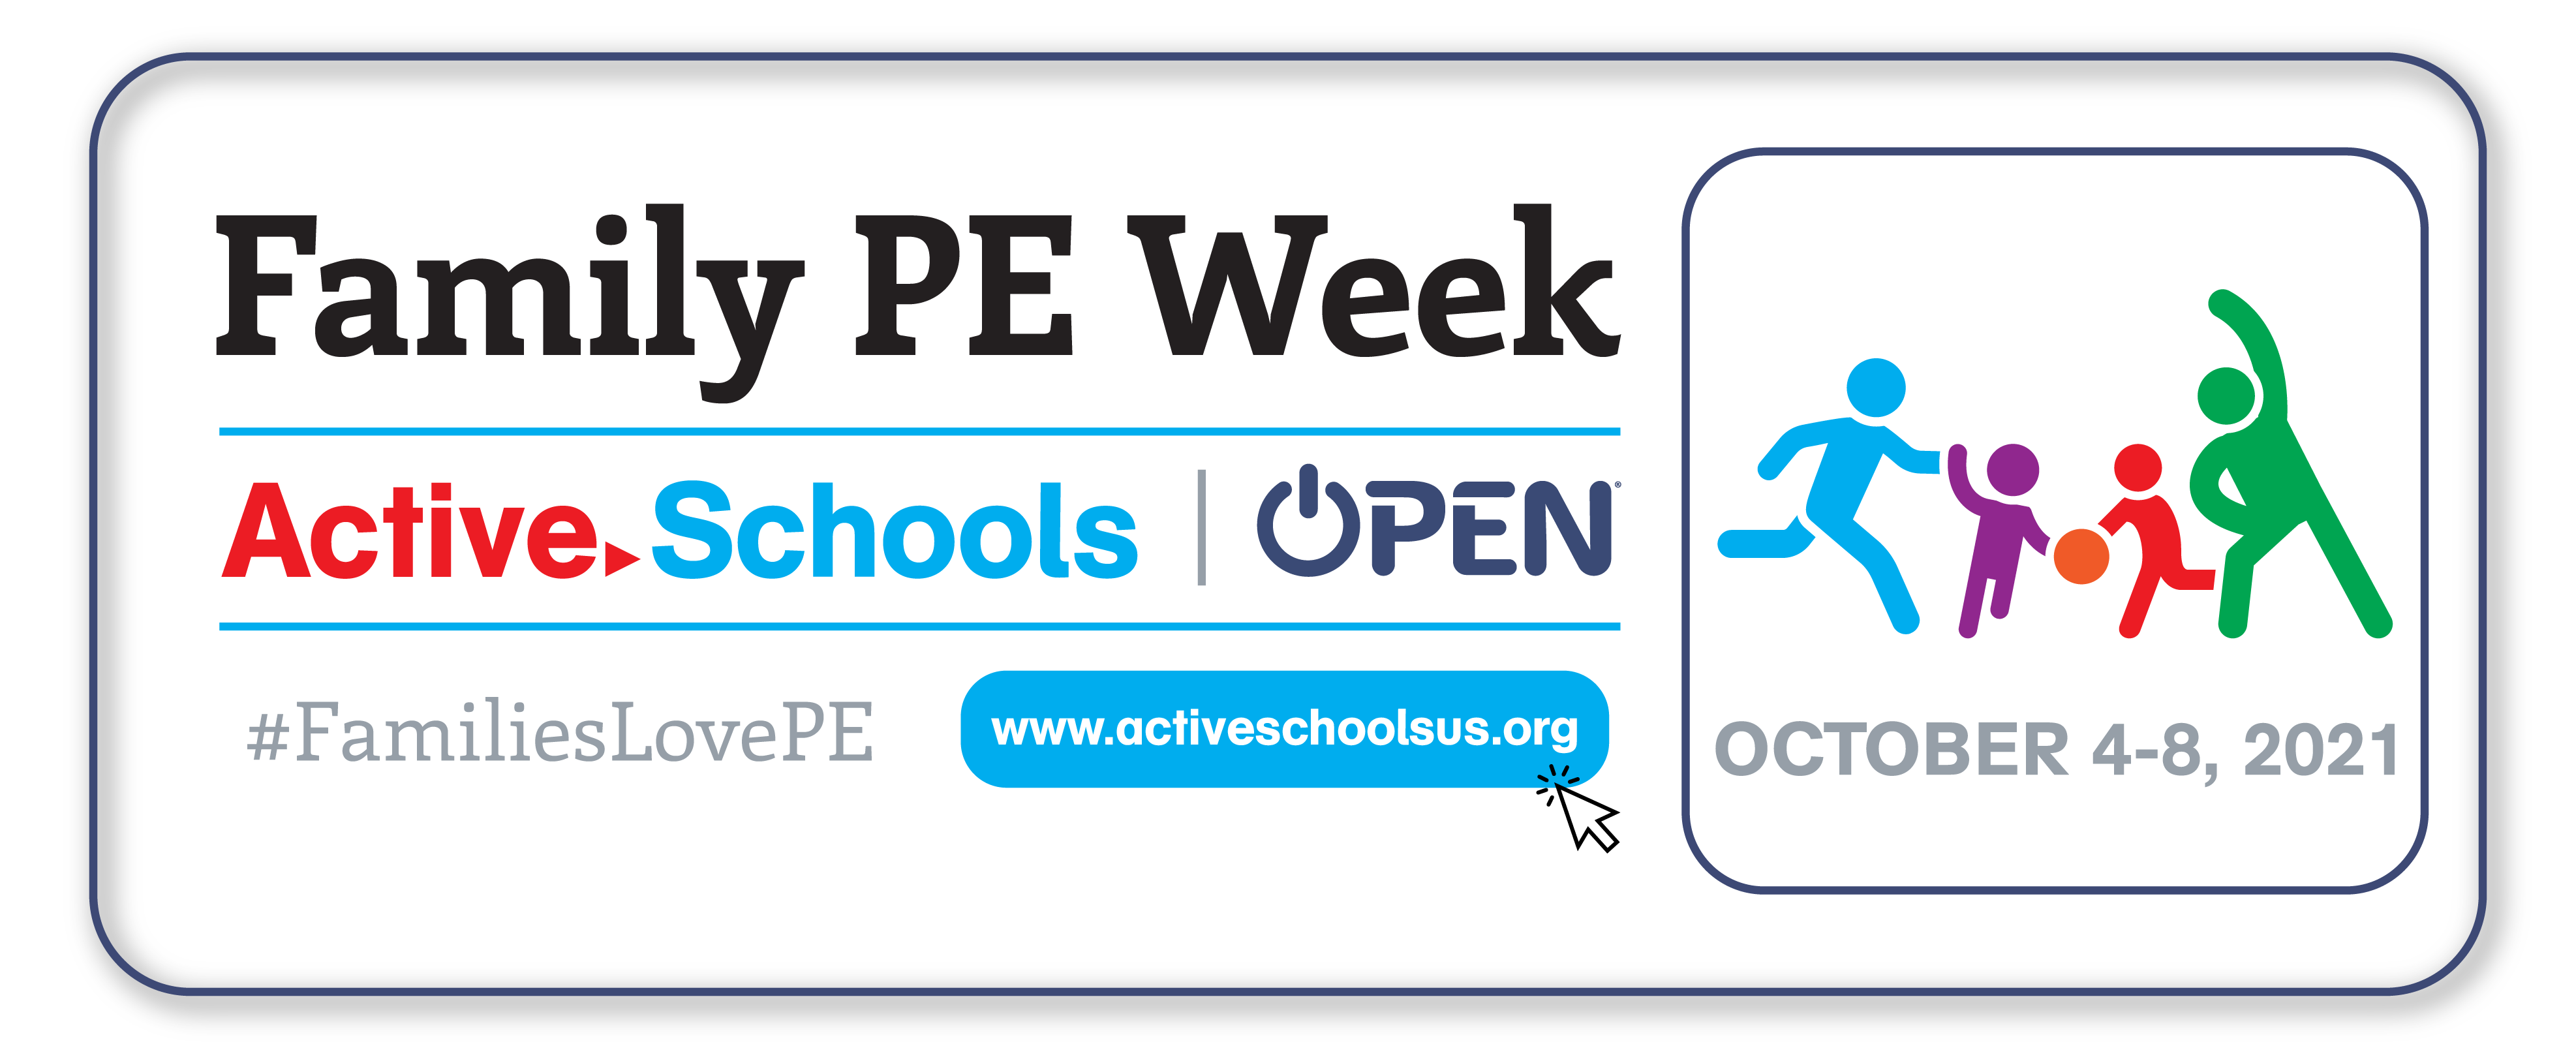 Bring PE to Your Family Week (October 19-23)